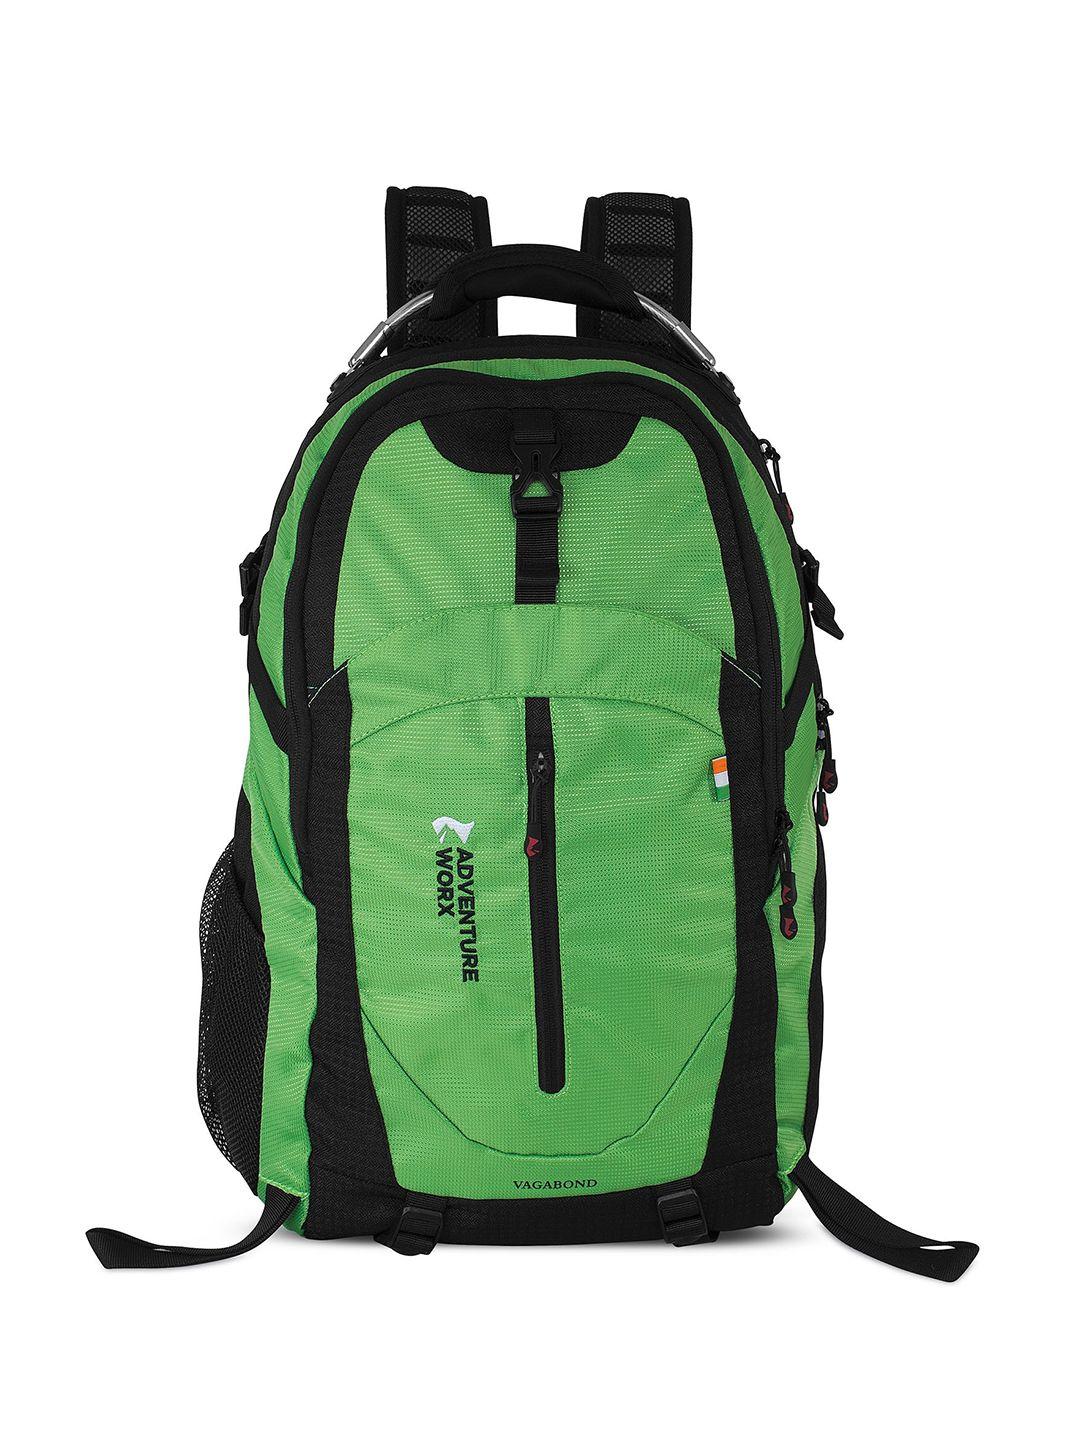 adventure worx unisex colourblocked backpack - laptop up to 18 inches